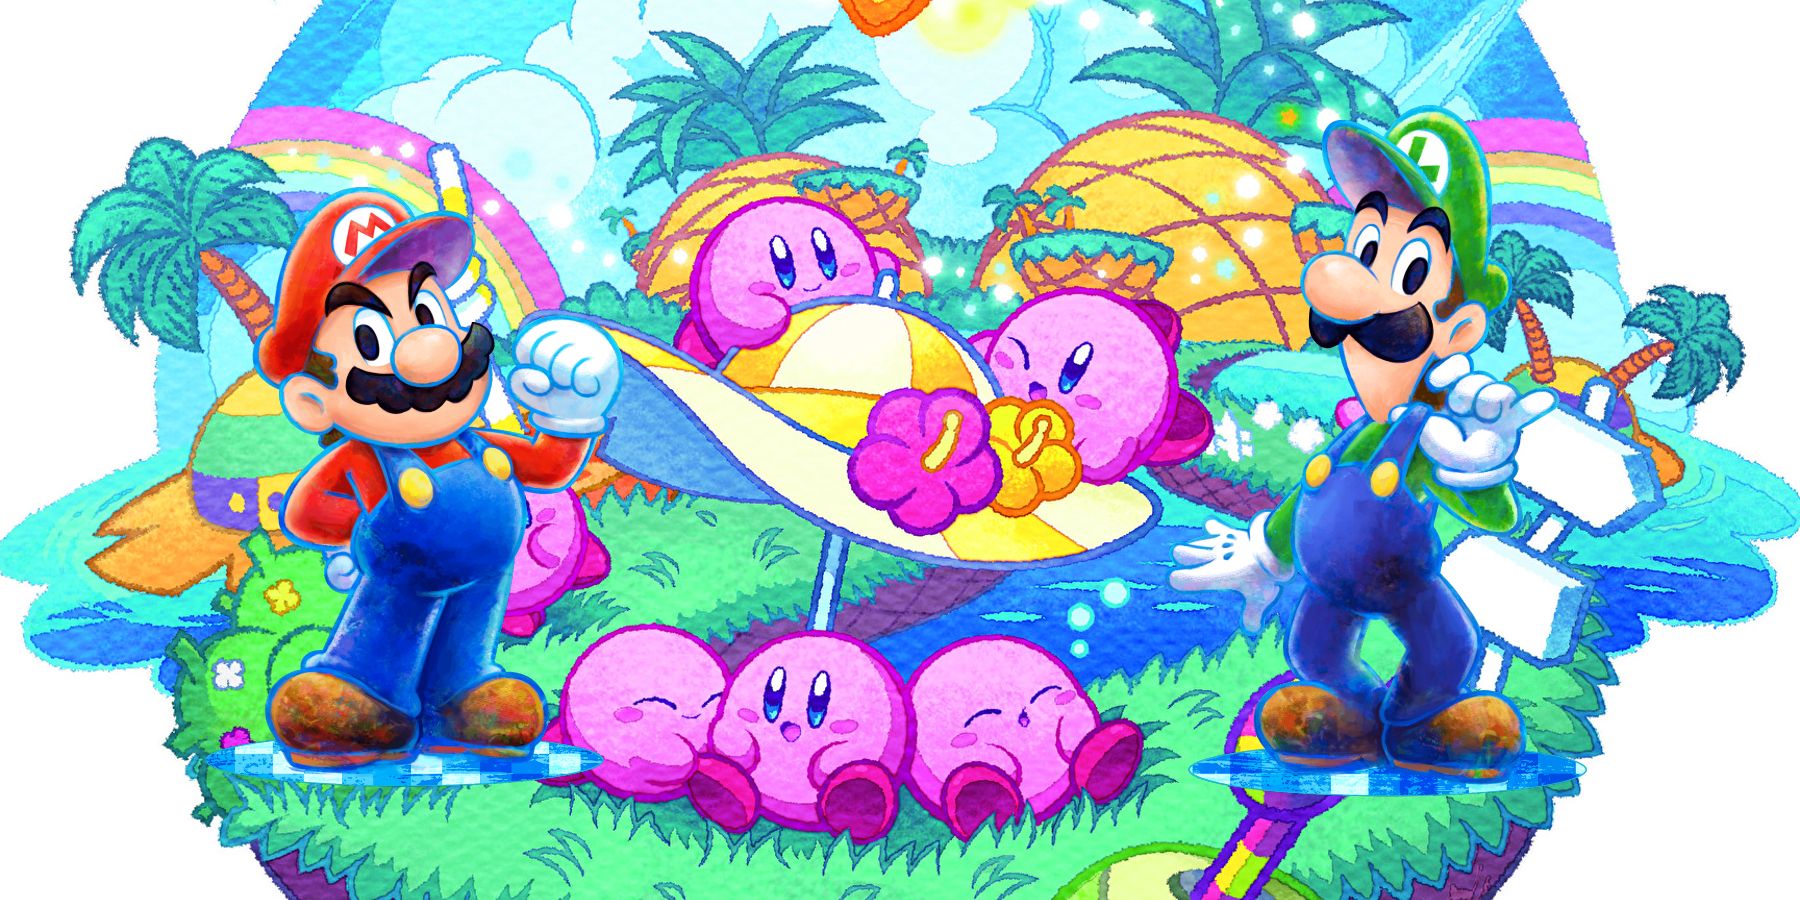 rpg spin off kirby quest sub game